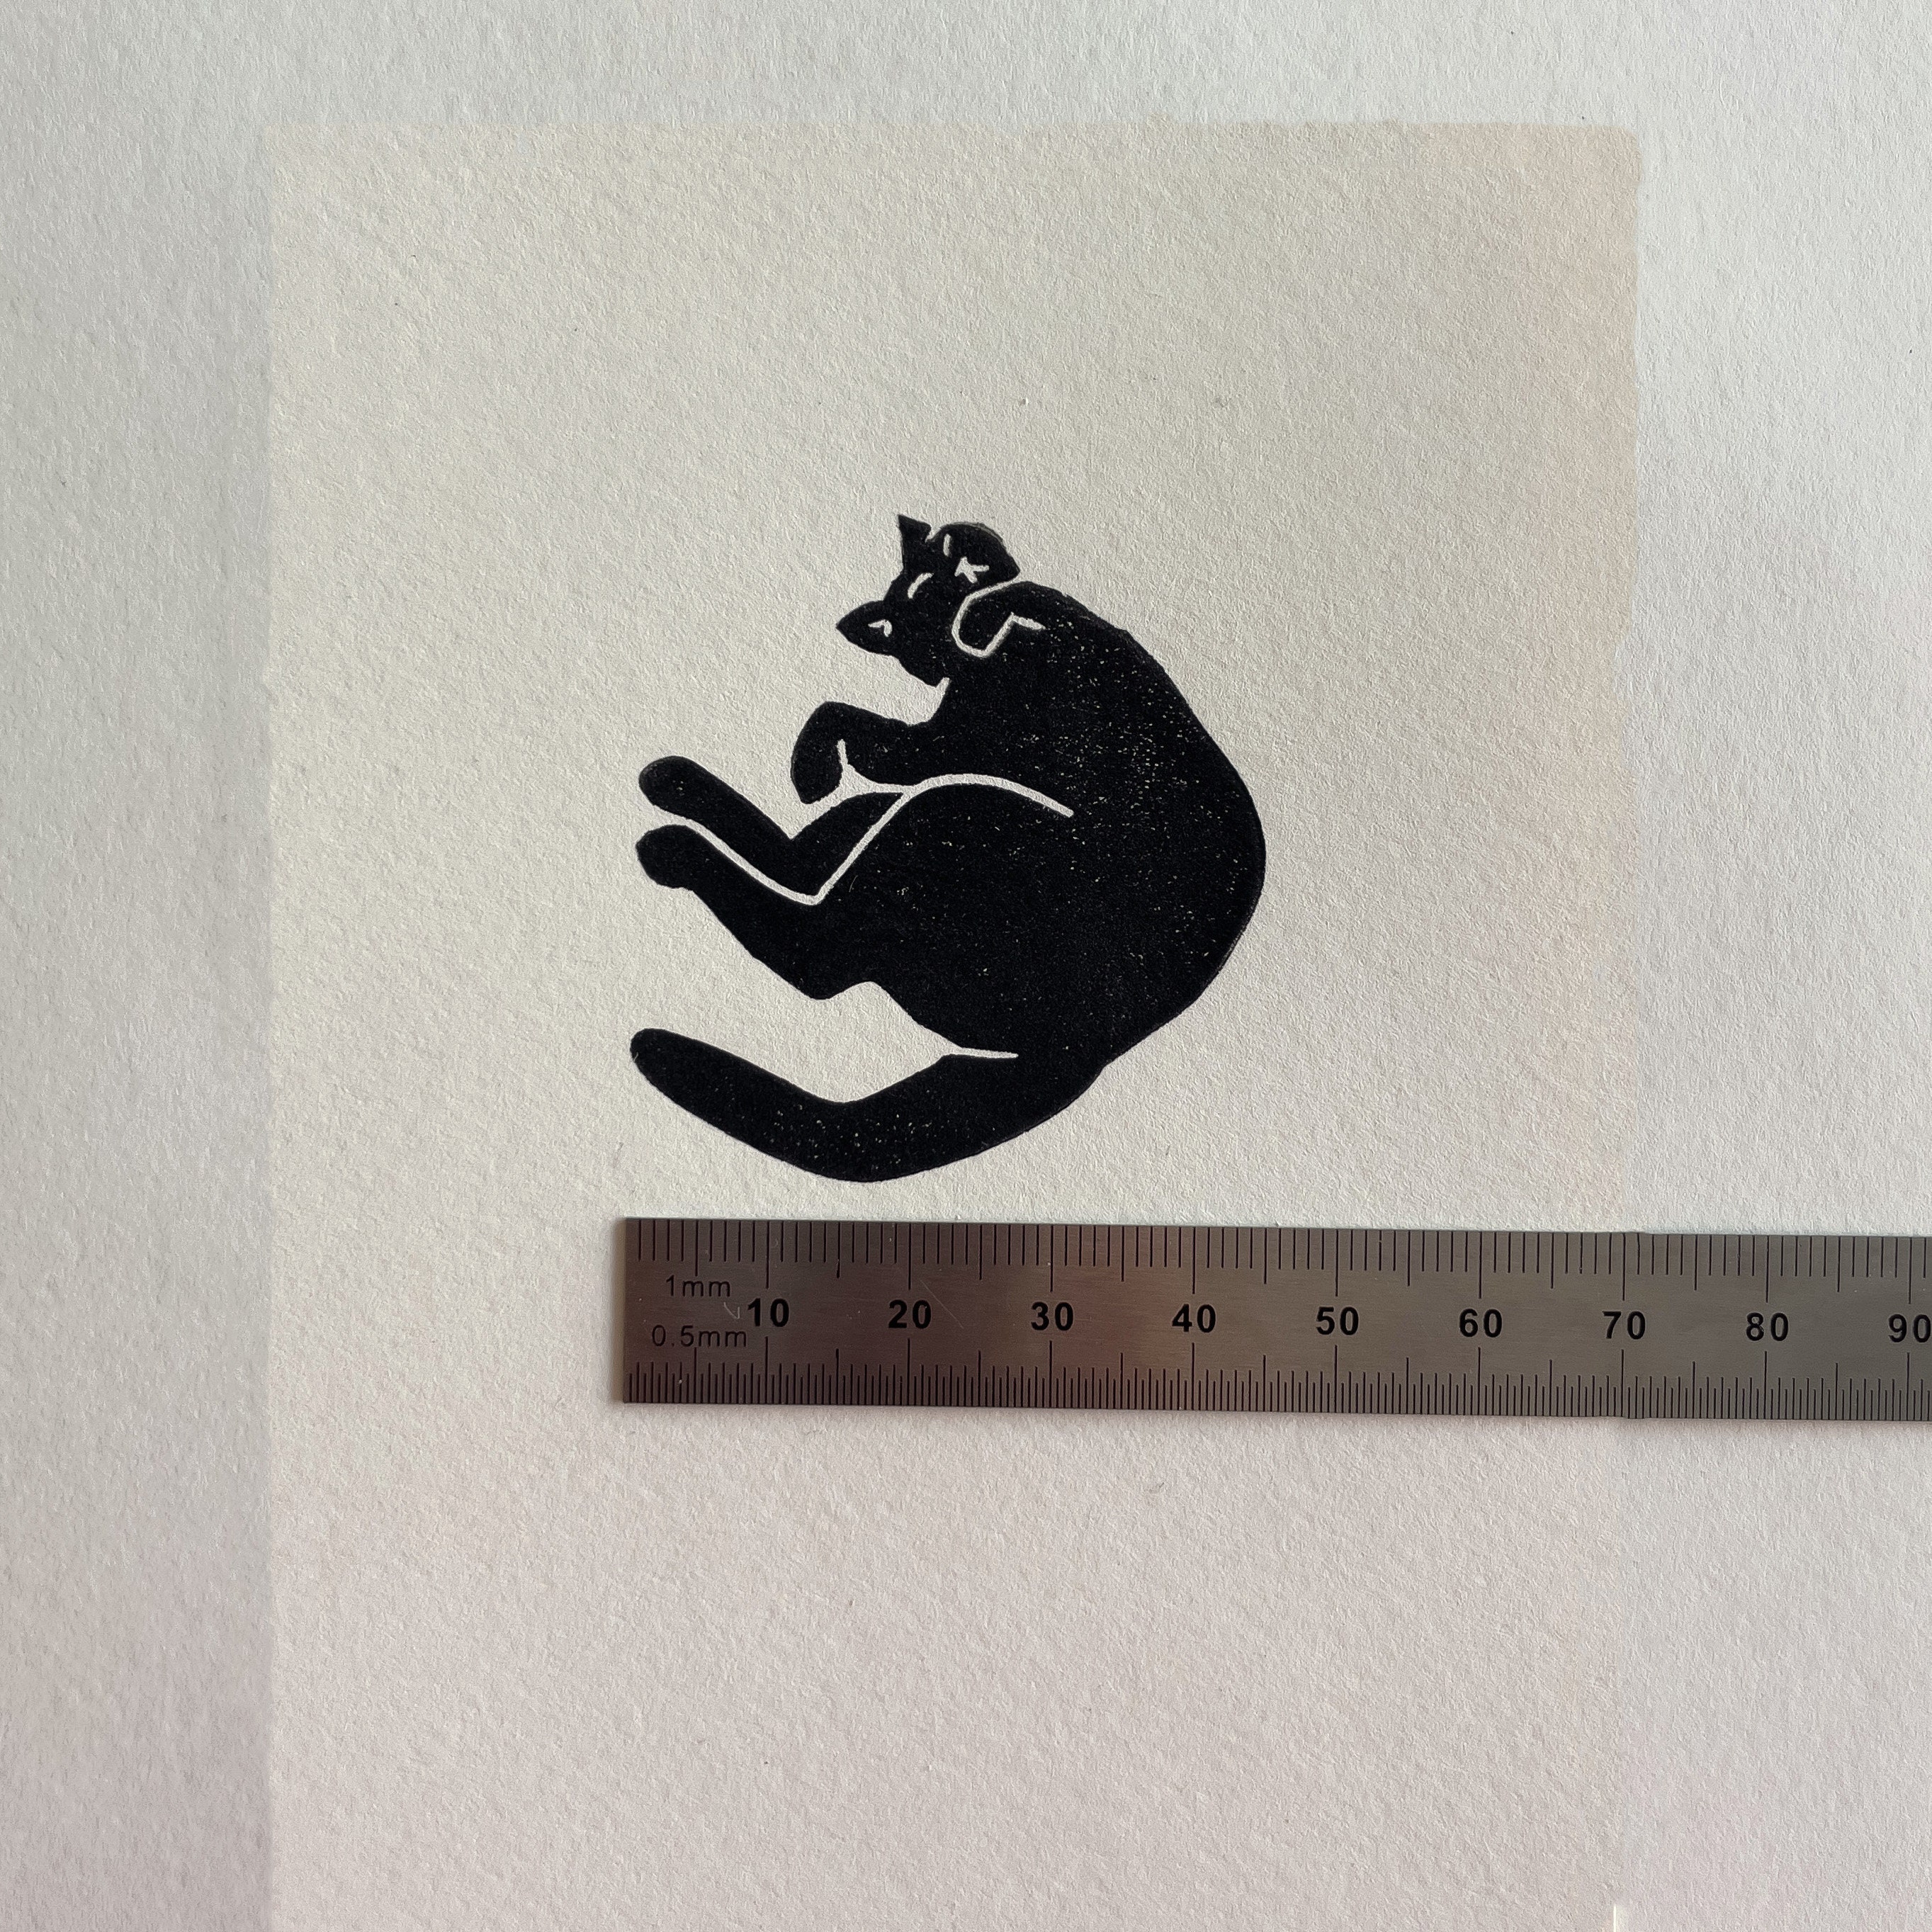 Sleeping Cat Rubber Stamp Hand Carved Rubber Stamp Stamping